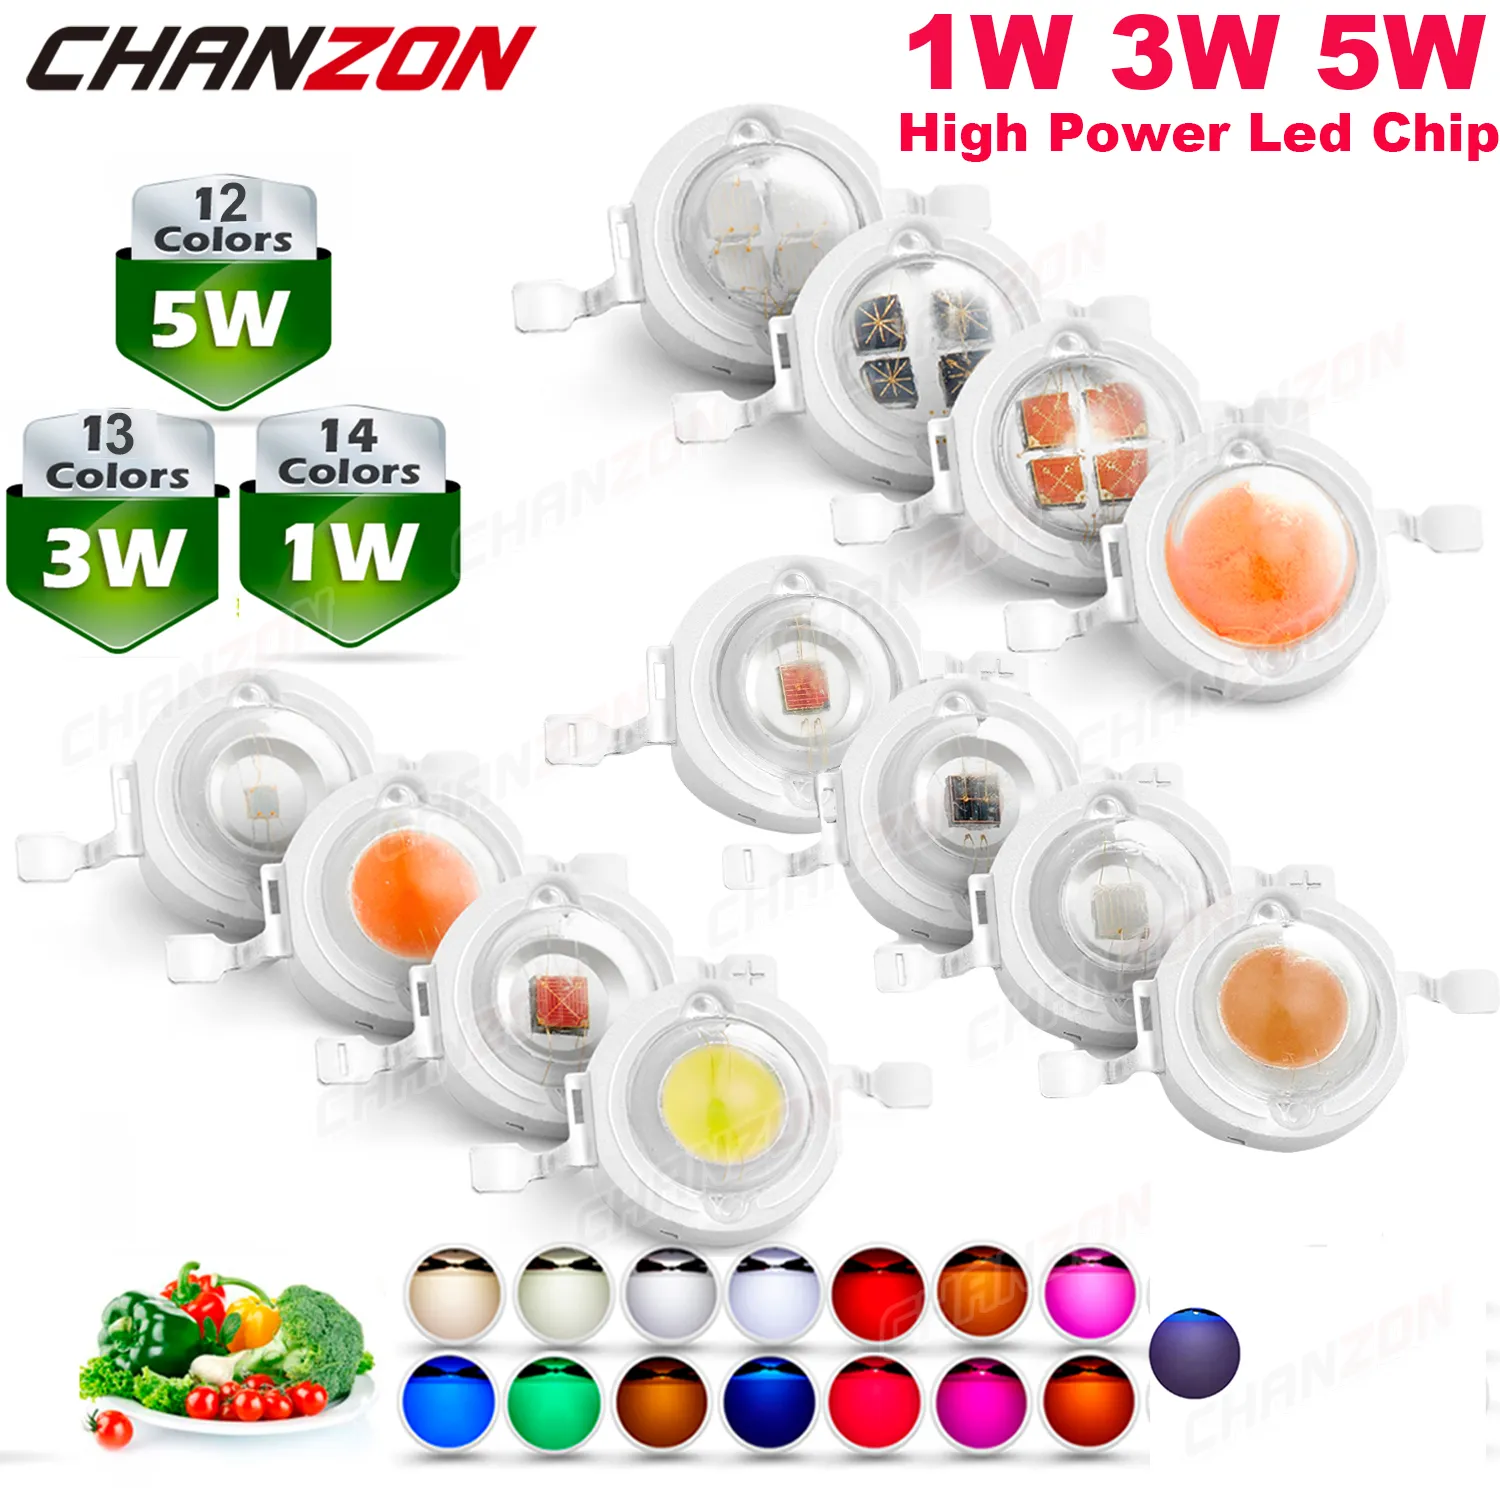 Warm Natural Cold White 1W 3W 5W High Power Smd Led Chip Light Bulb UV Orange Red Blue Yellow Plant Grow Lamp Emitter Diode Bead